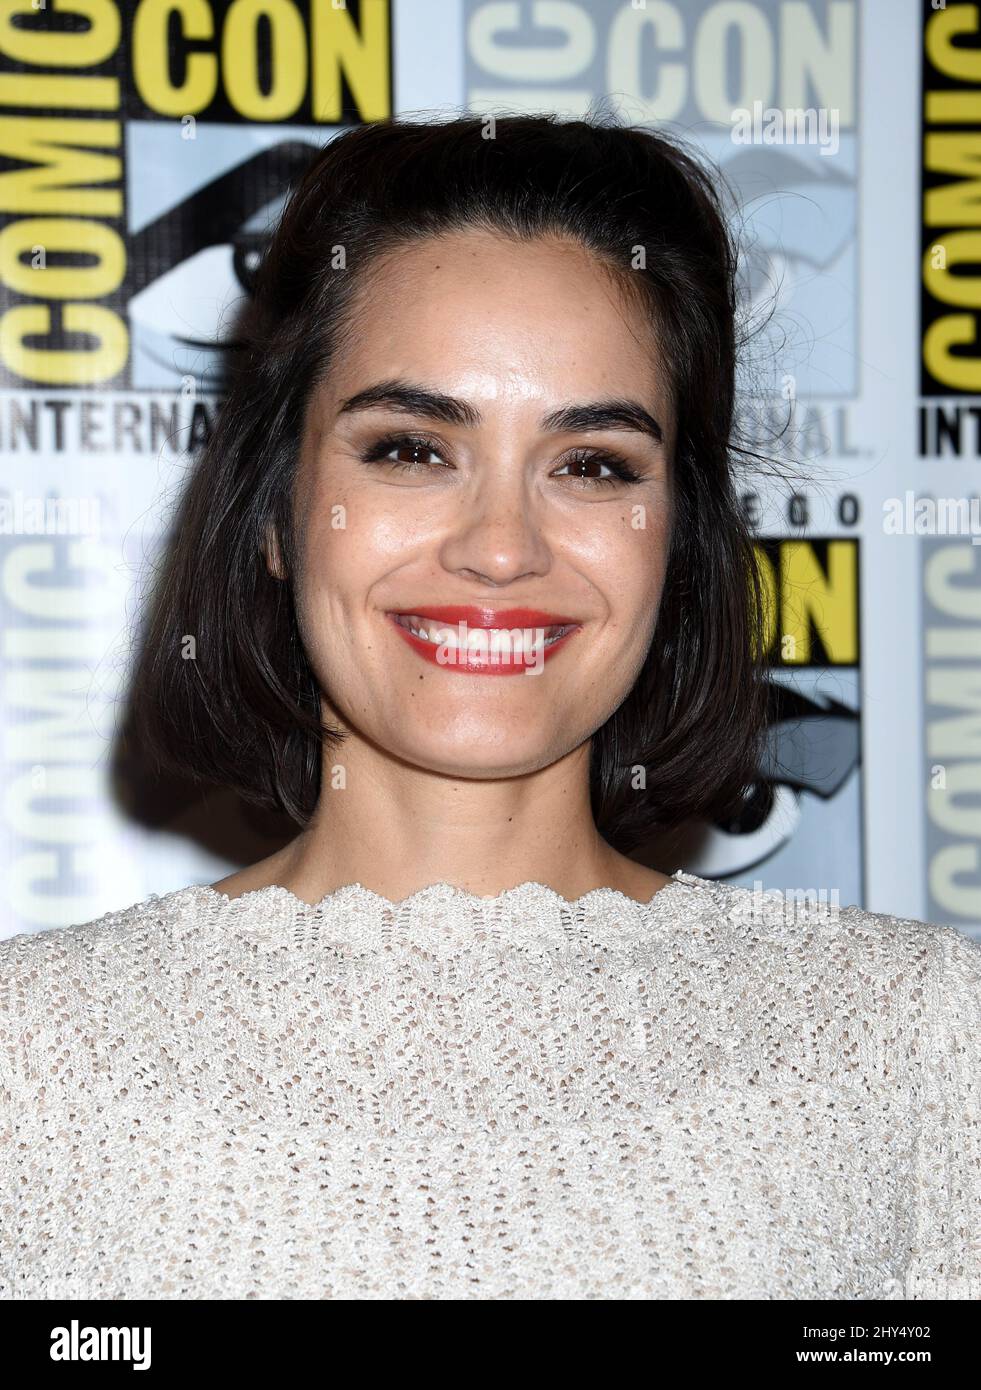 Shannyn Sossamon attending day one of Comic-Con in San Diego, California. Stock Photo